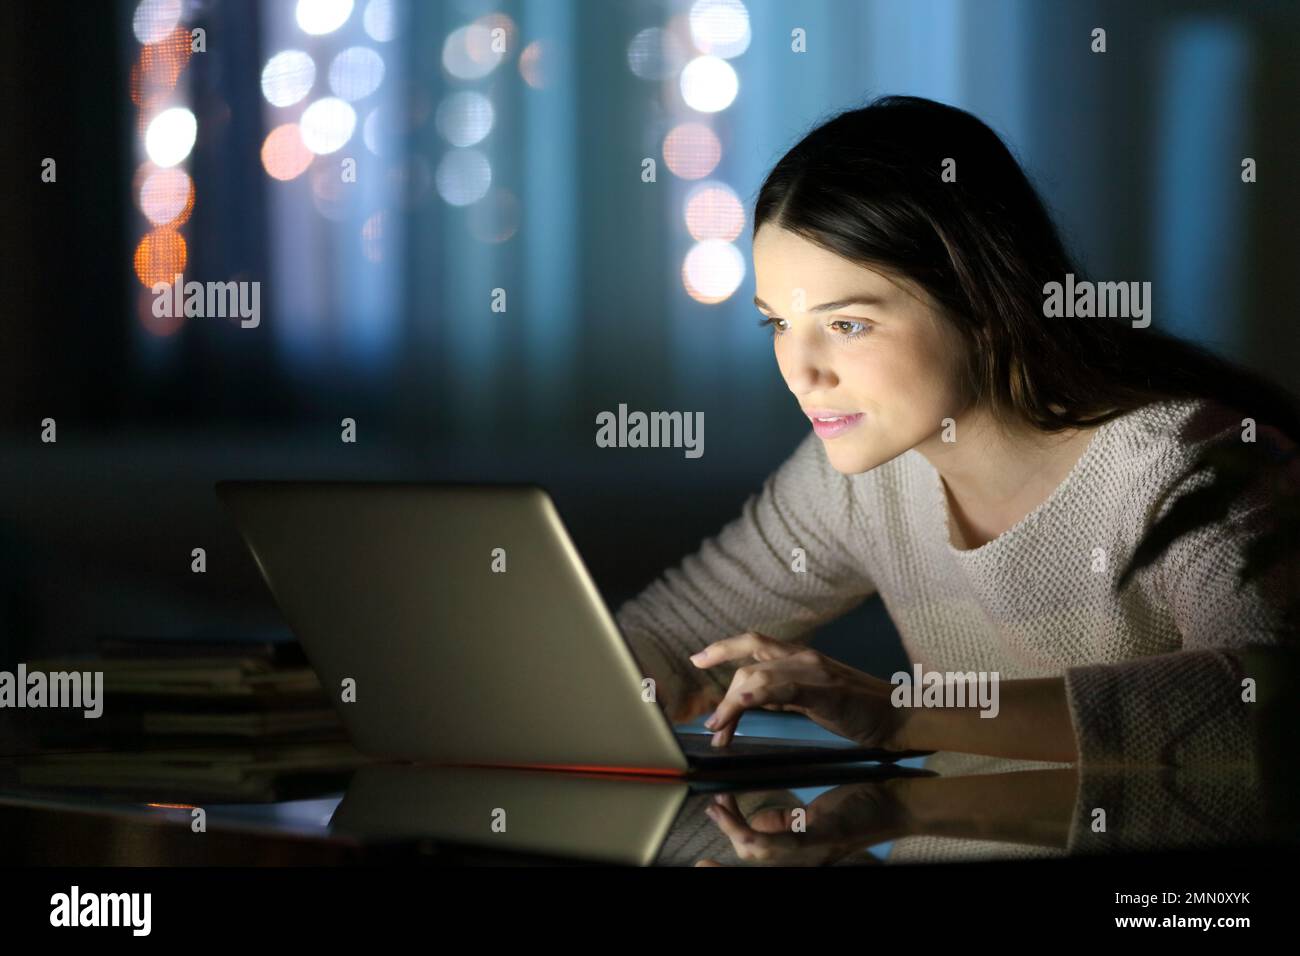 Woman using laptop in the night at home Stock Photo